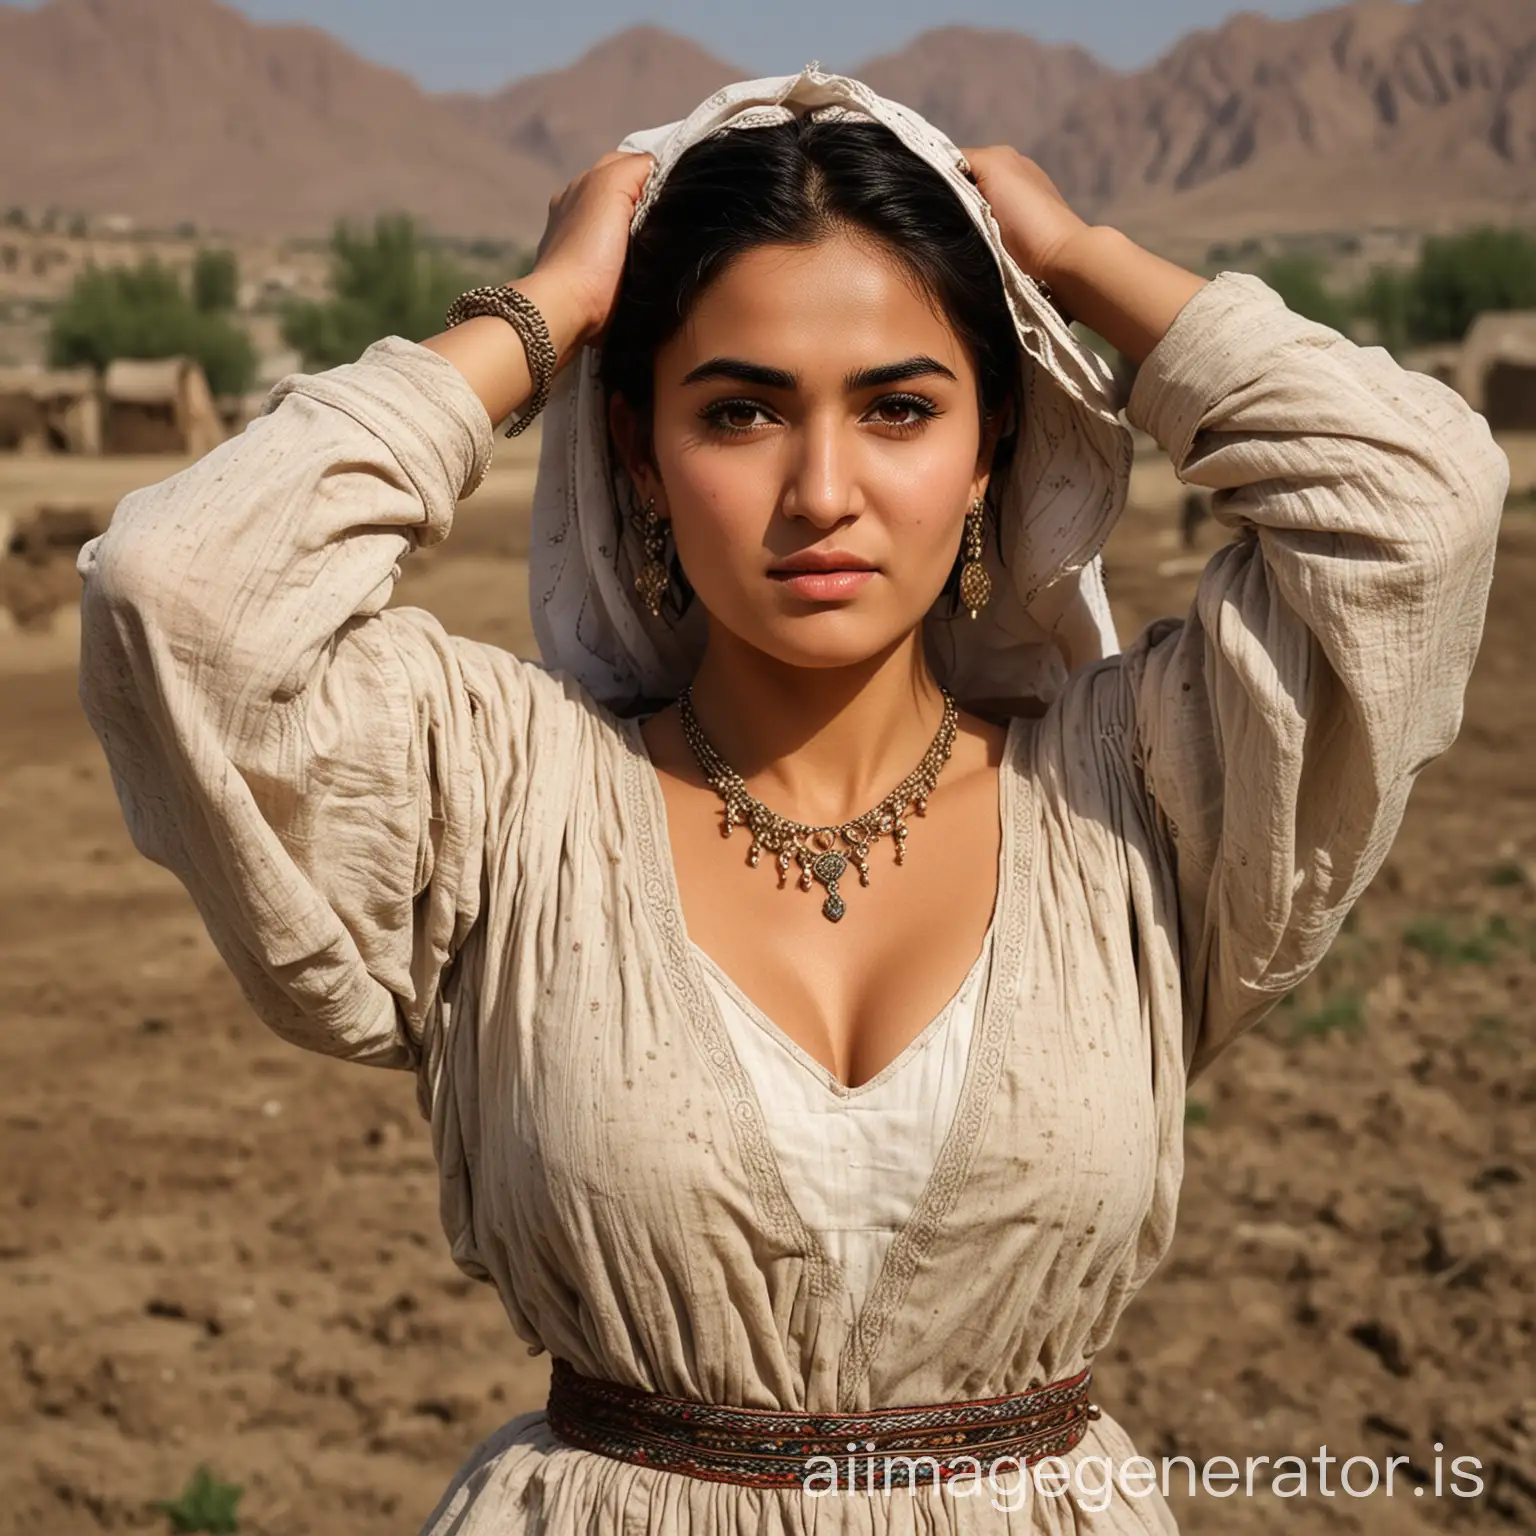 Traditional-Afghan-Peasant-Woman-Flexing-Muscular-Upper-Arms-on-Farmland